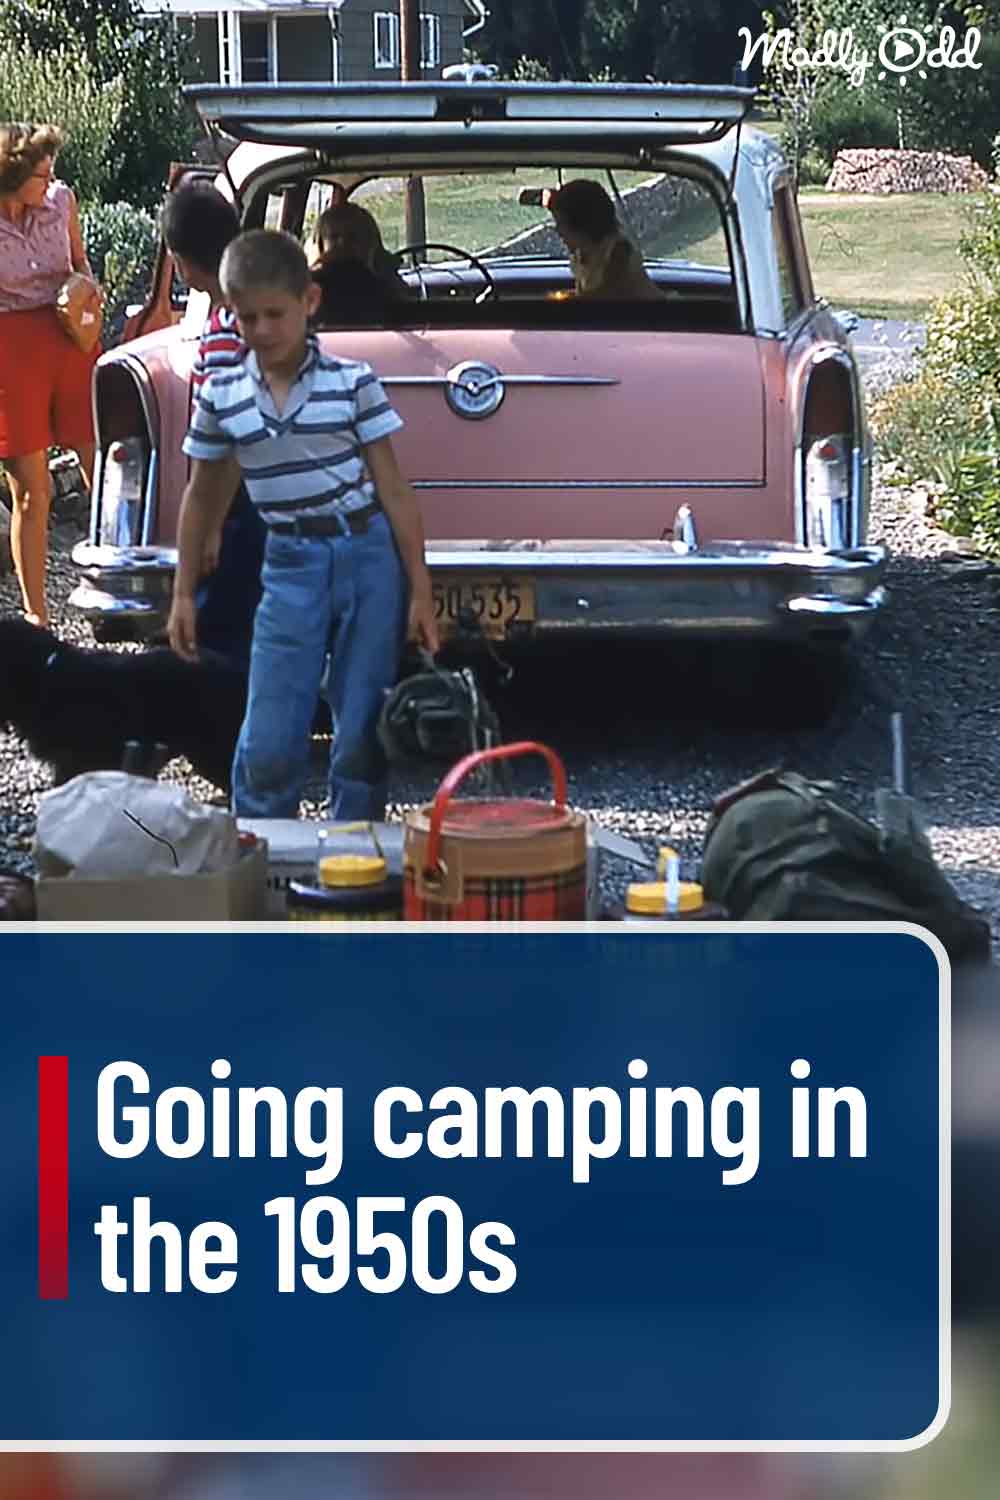 Going camping in the 1950s